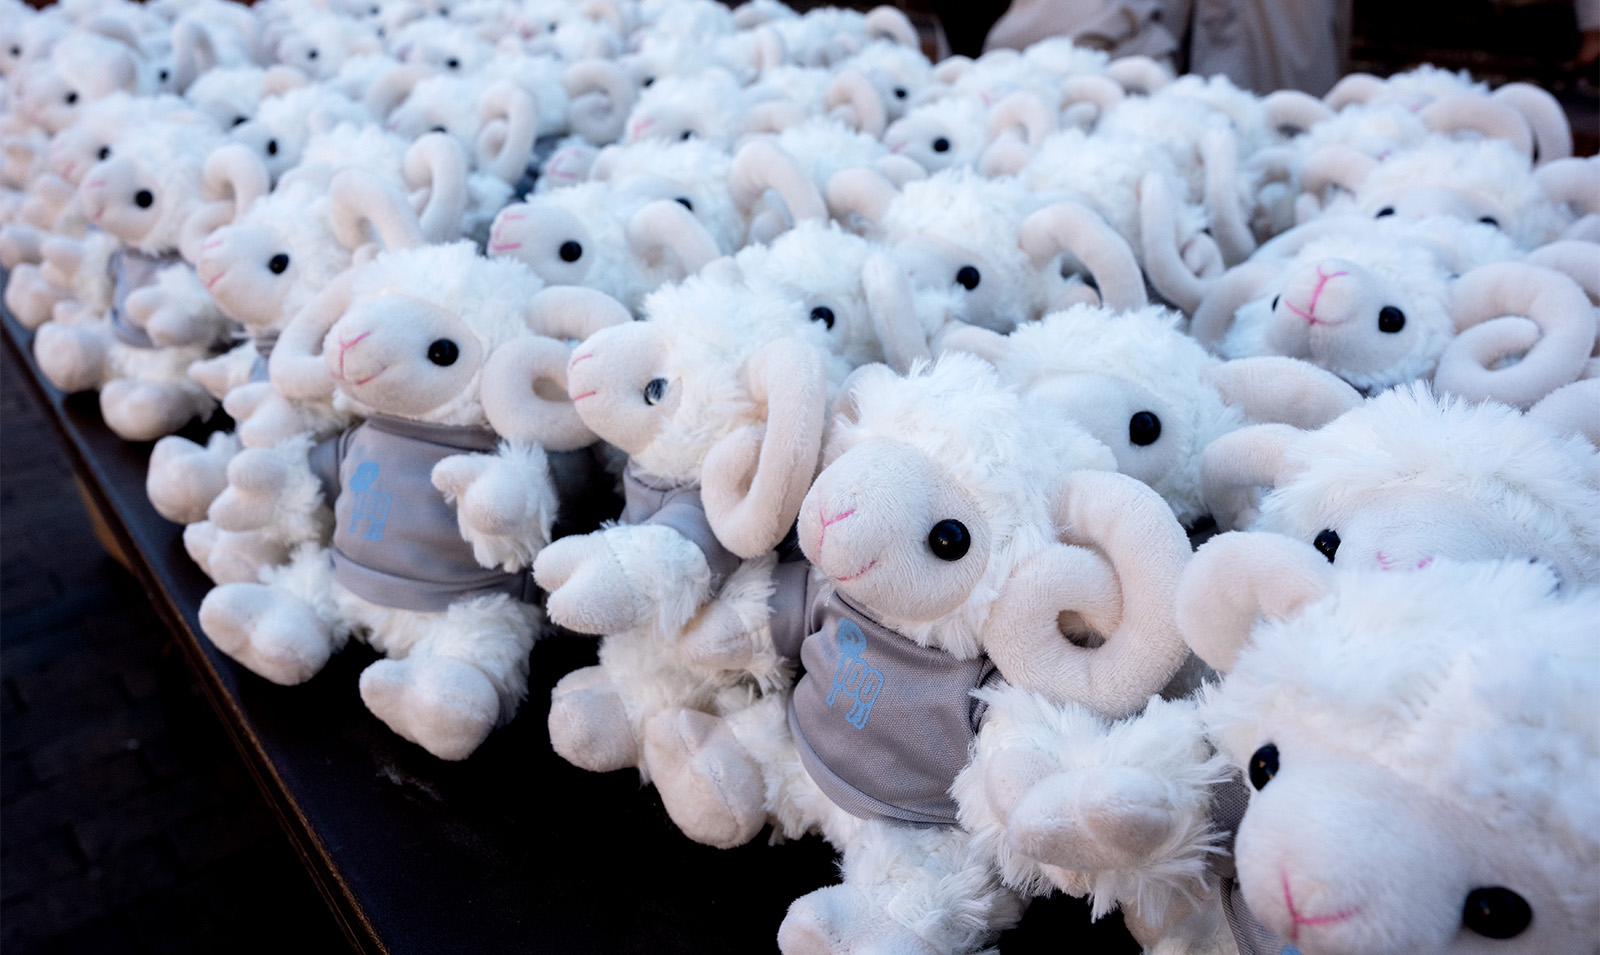 Rows of stuffed animals of Rameses, the mascot of UNC-Chapel Hill.